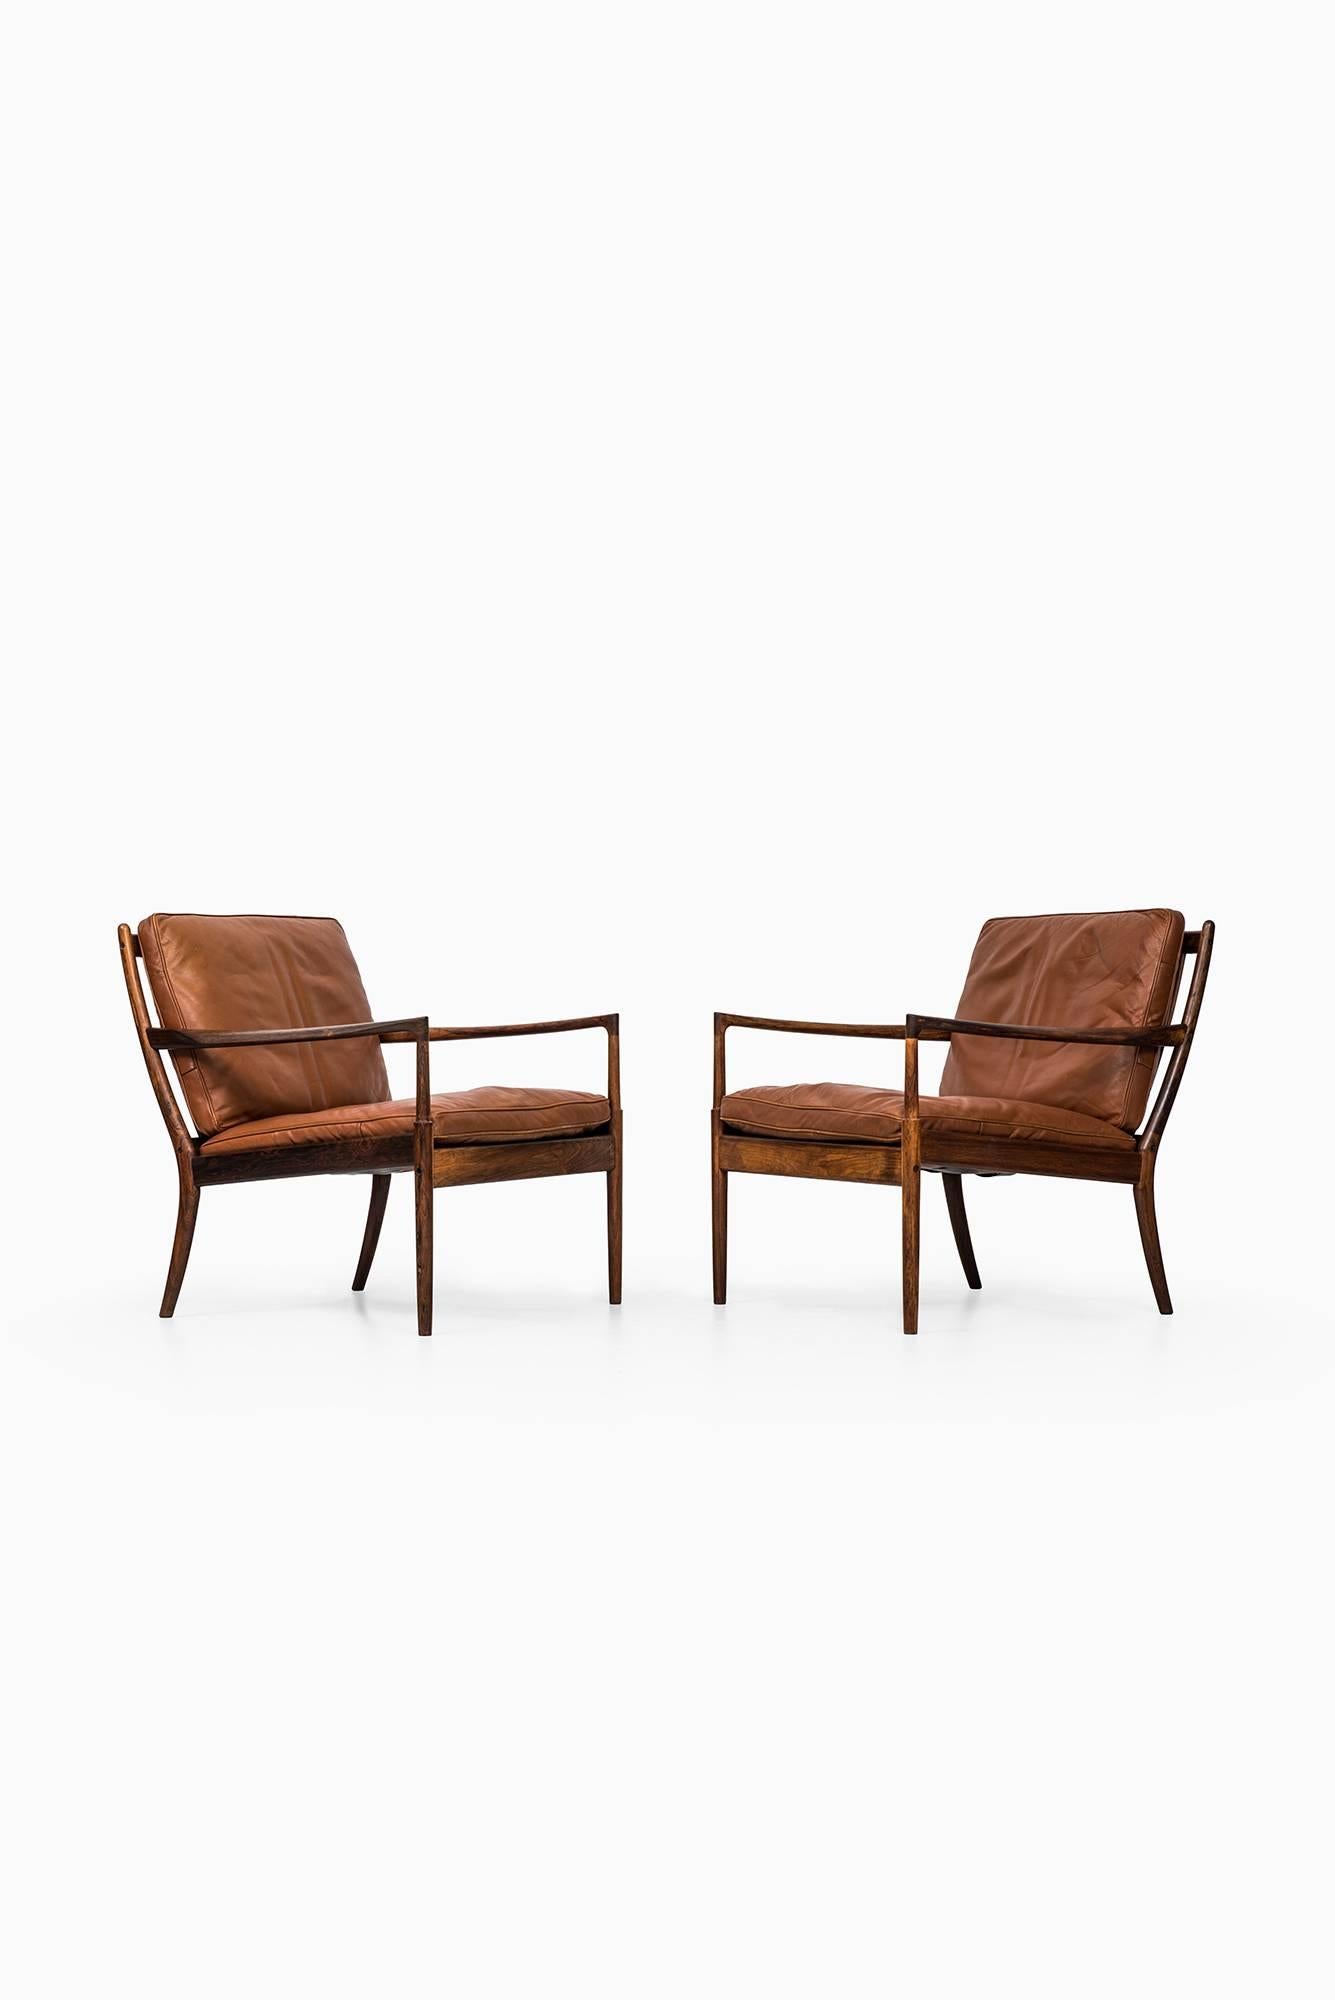 Mid-20th Century Rare Pair of Easy Chairs Model Samsö Designed by Ib Kofod-Larsen Produced by OPE